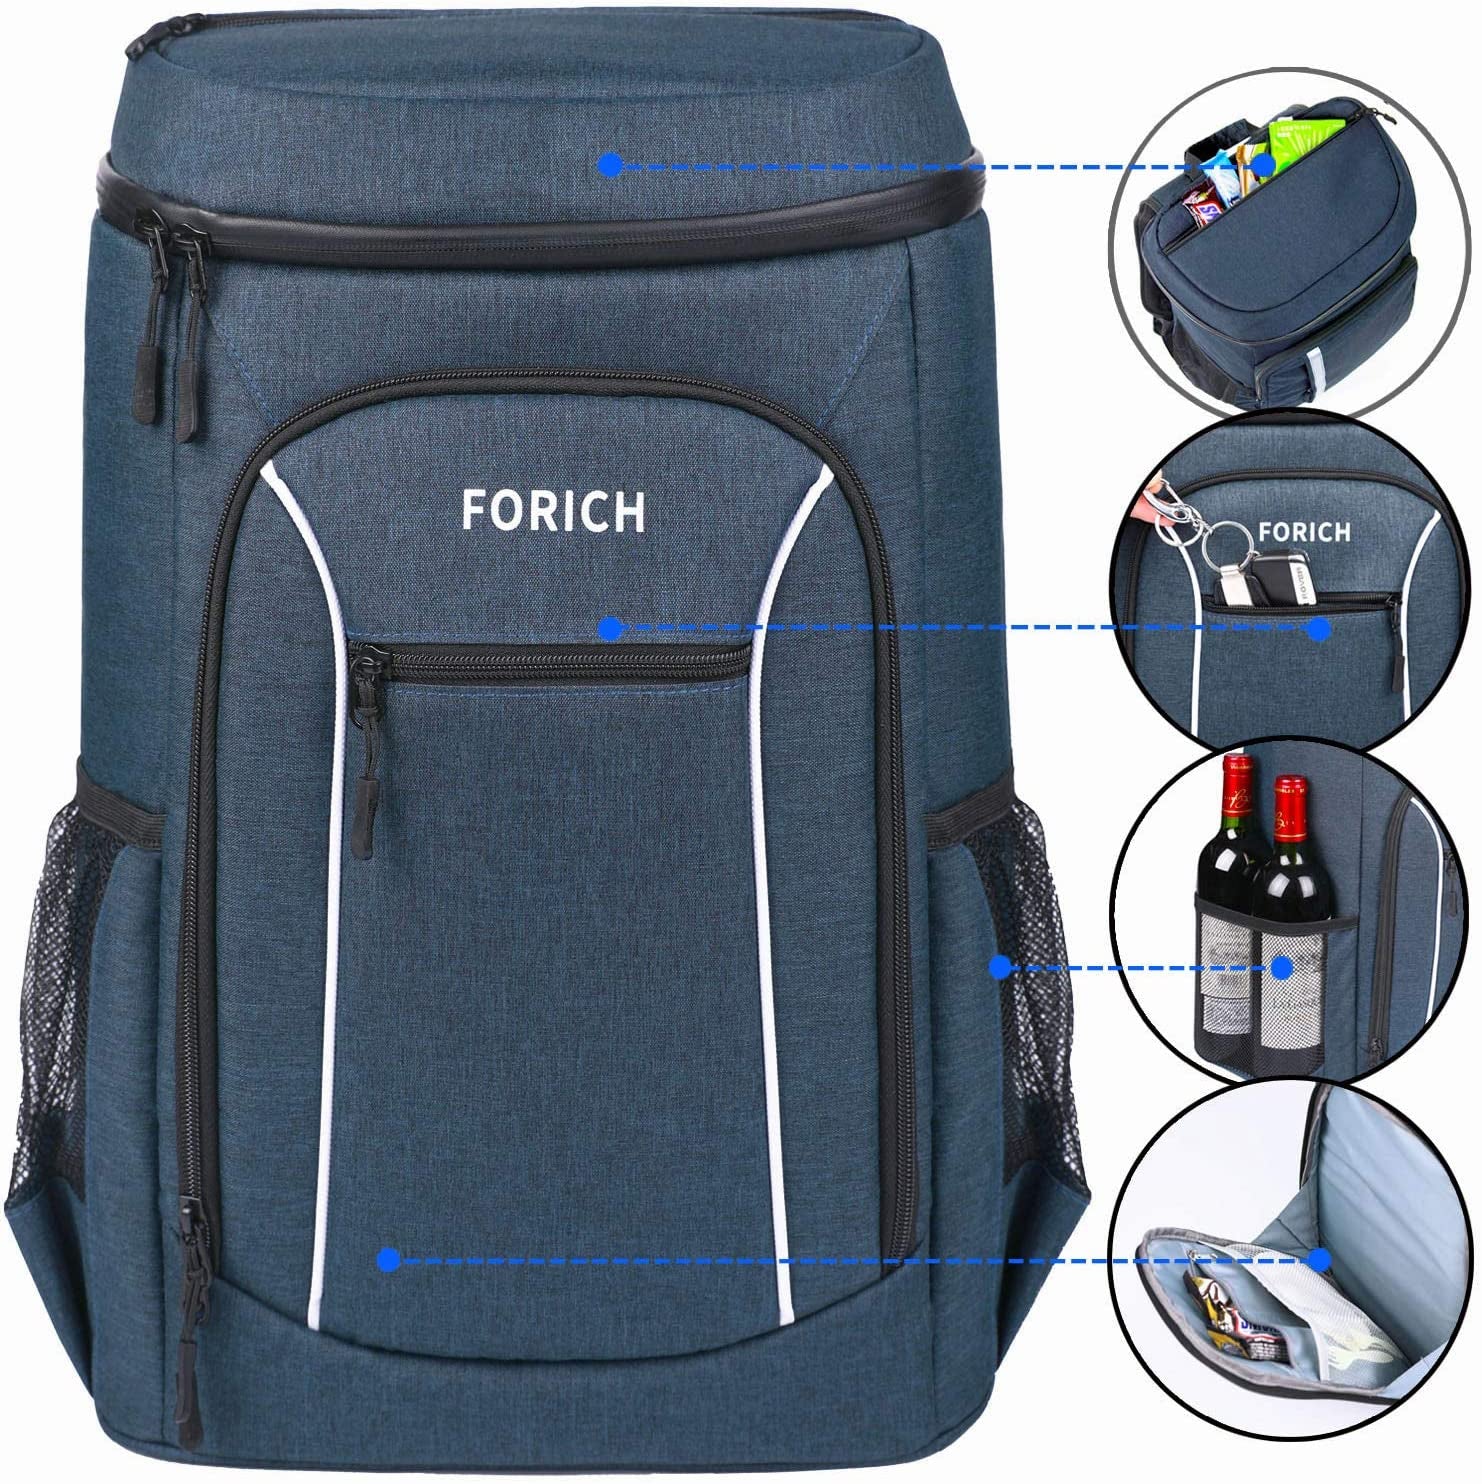 Lightweight Insulated Backpack Soft Cooler Bag, HOLDS 30 CANS and 2 WINE BOTTLES!